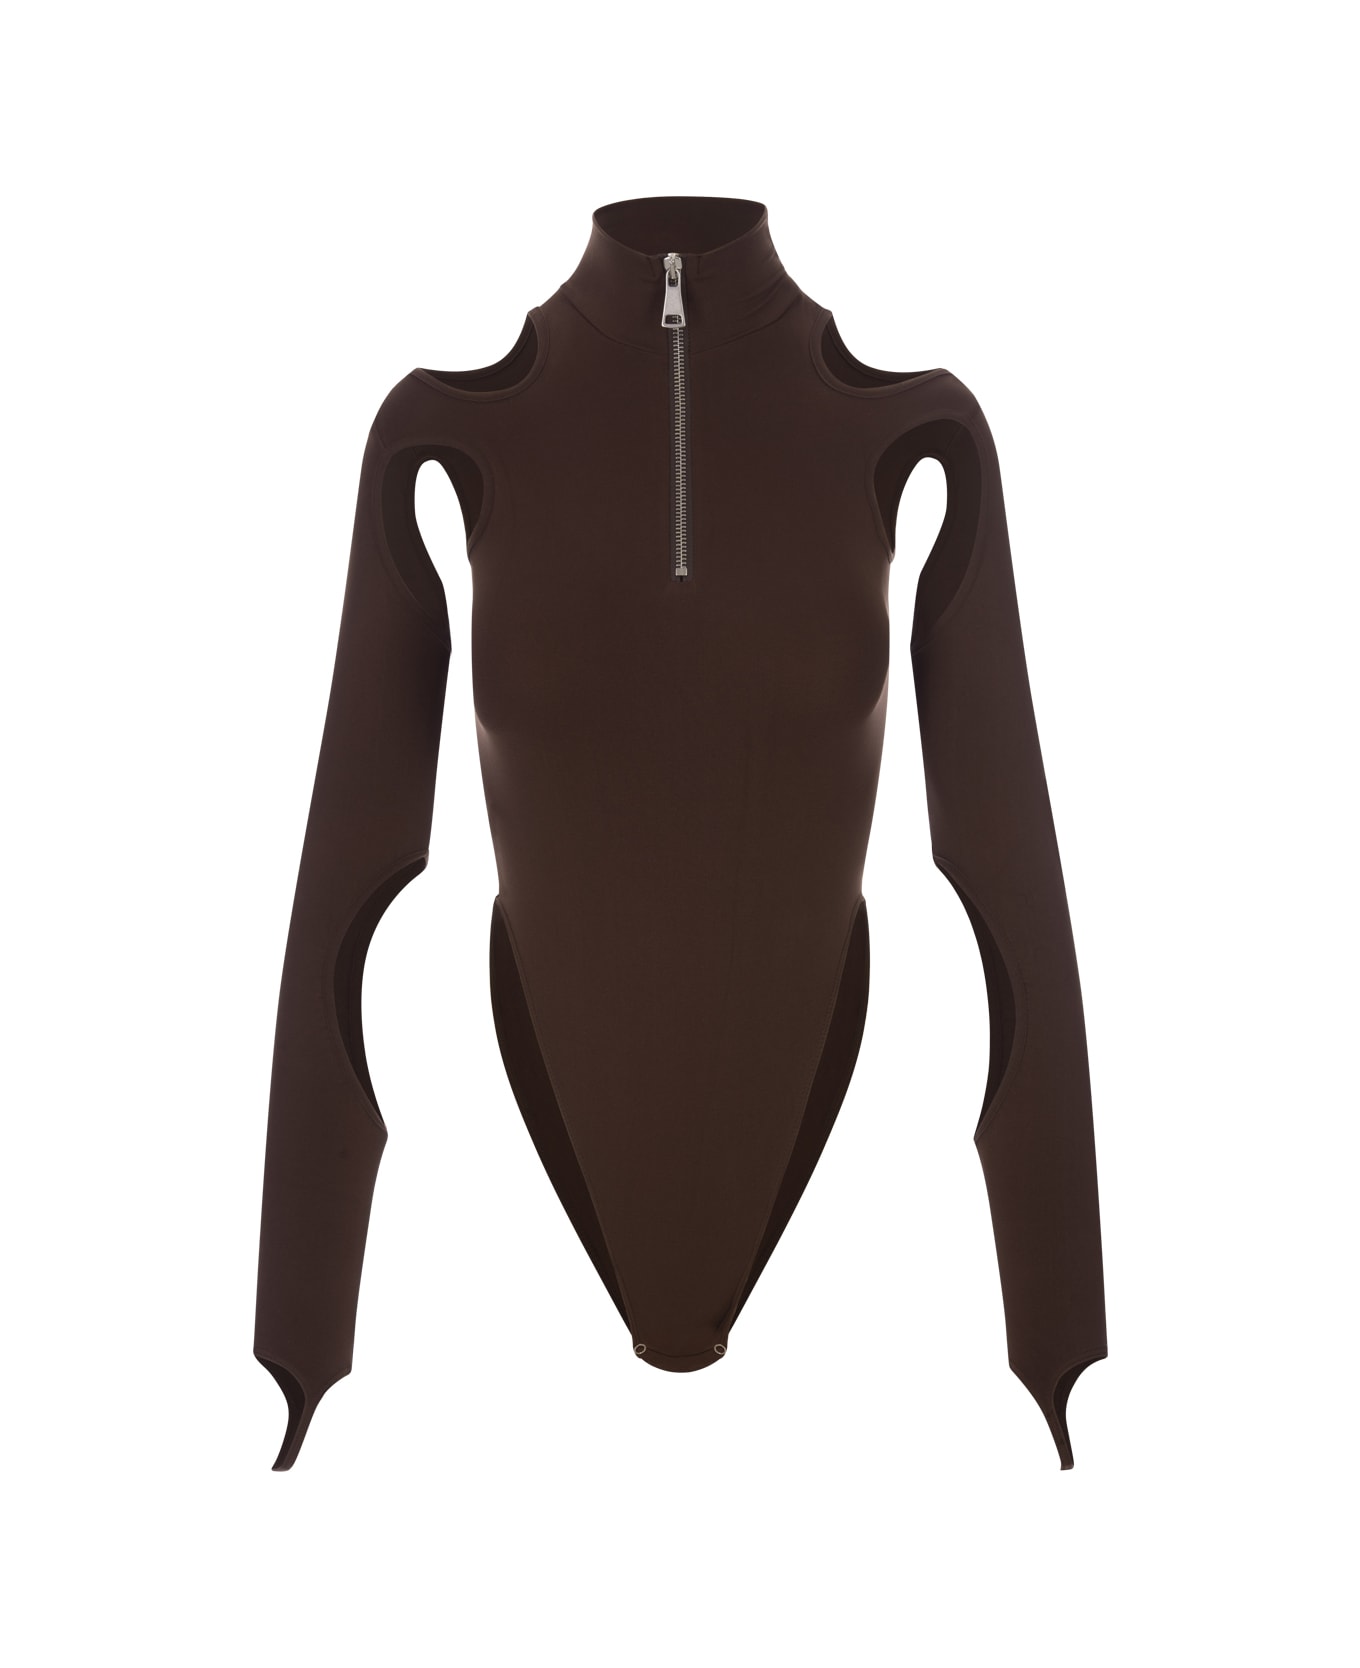 ANDREĀDAMO Brown Body Top With Cut-out - Brown